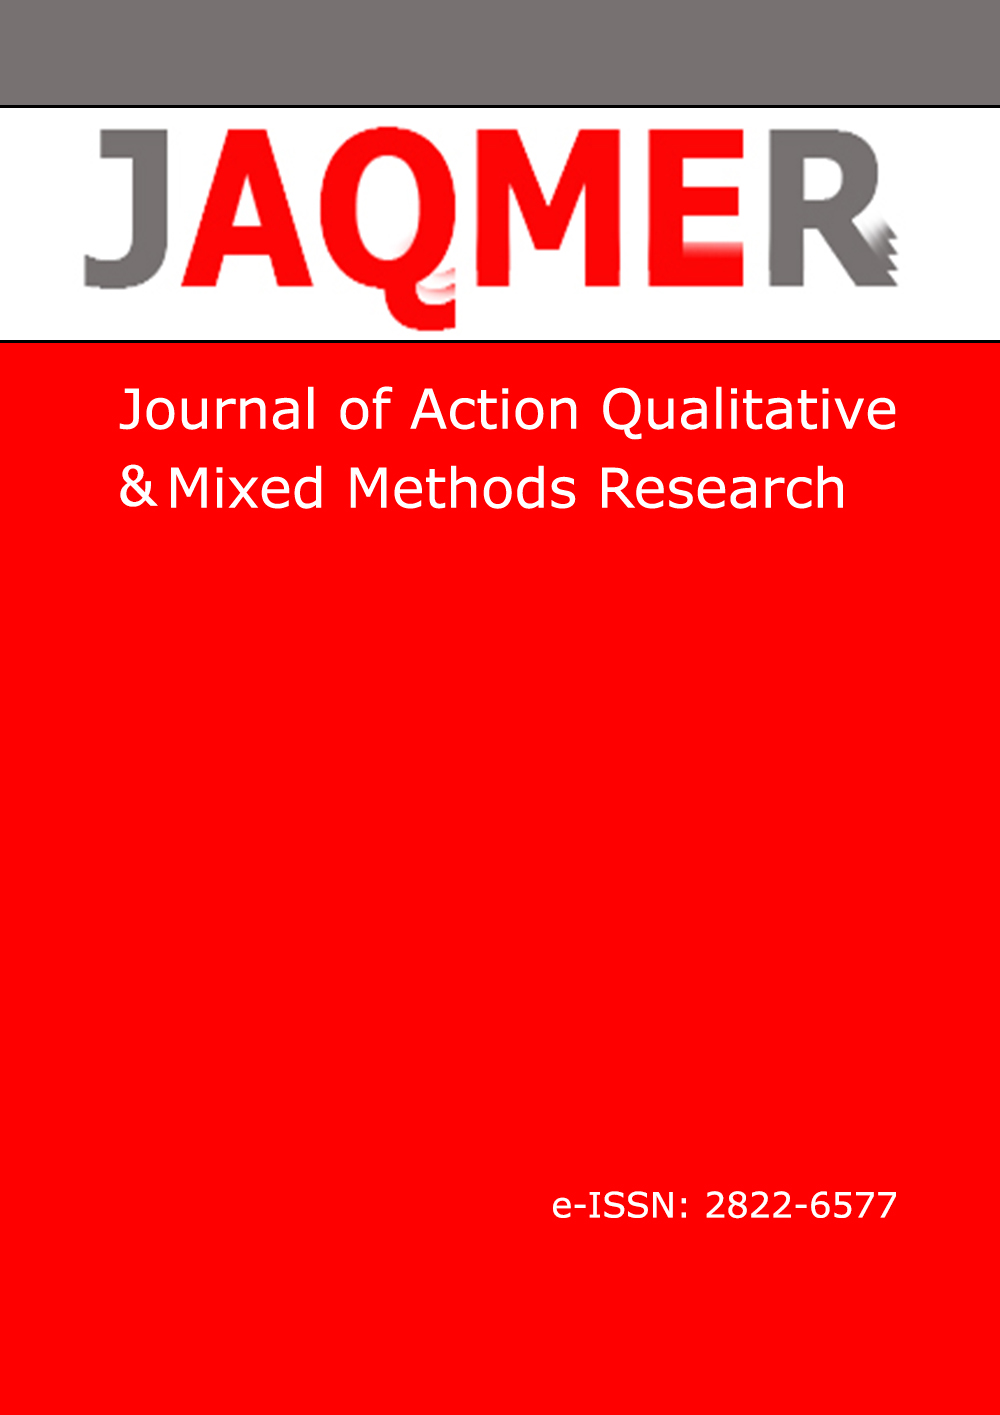 					View Volume 1 Issue 1 (2022): Journal of Action Qualitative & Mixed Methods Research
				